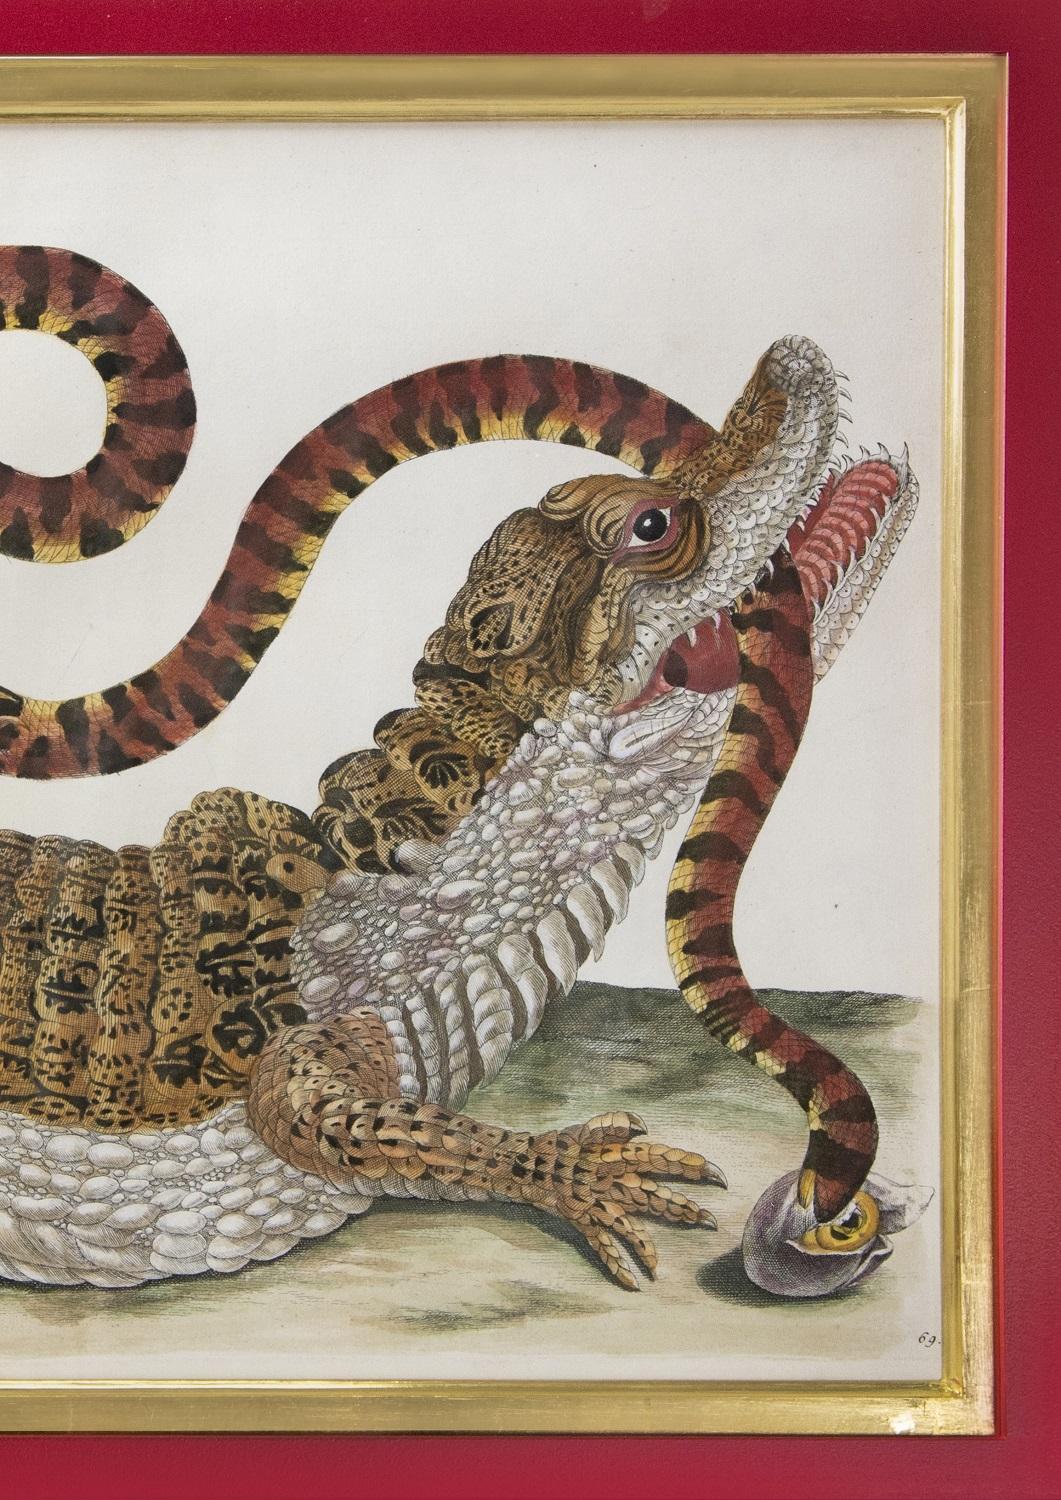 Alligator with Snake and a Lizard.   - Brown Animal Print by (After) Maria Sybilla Merian